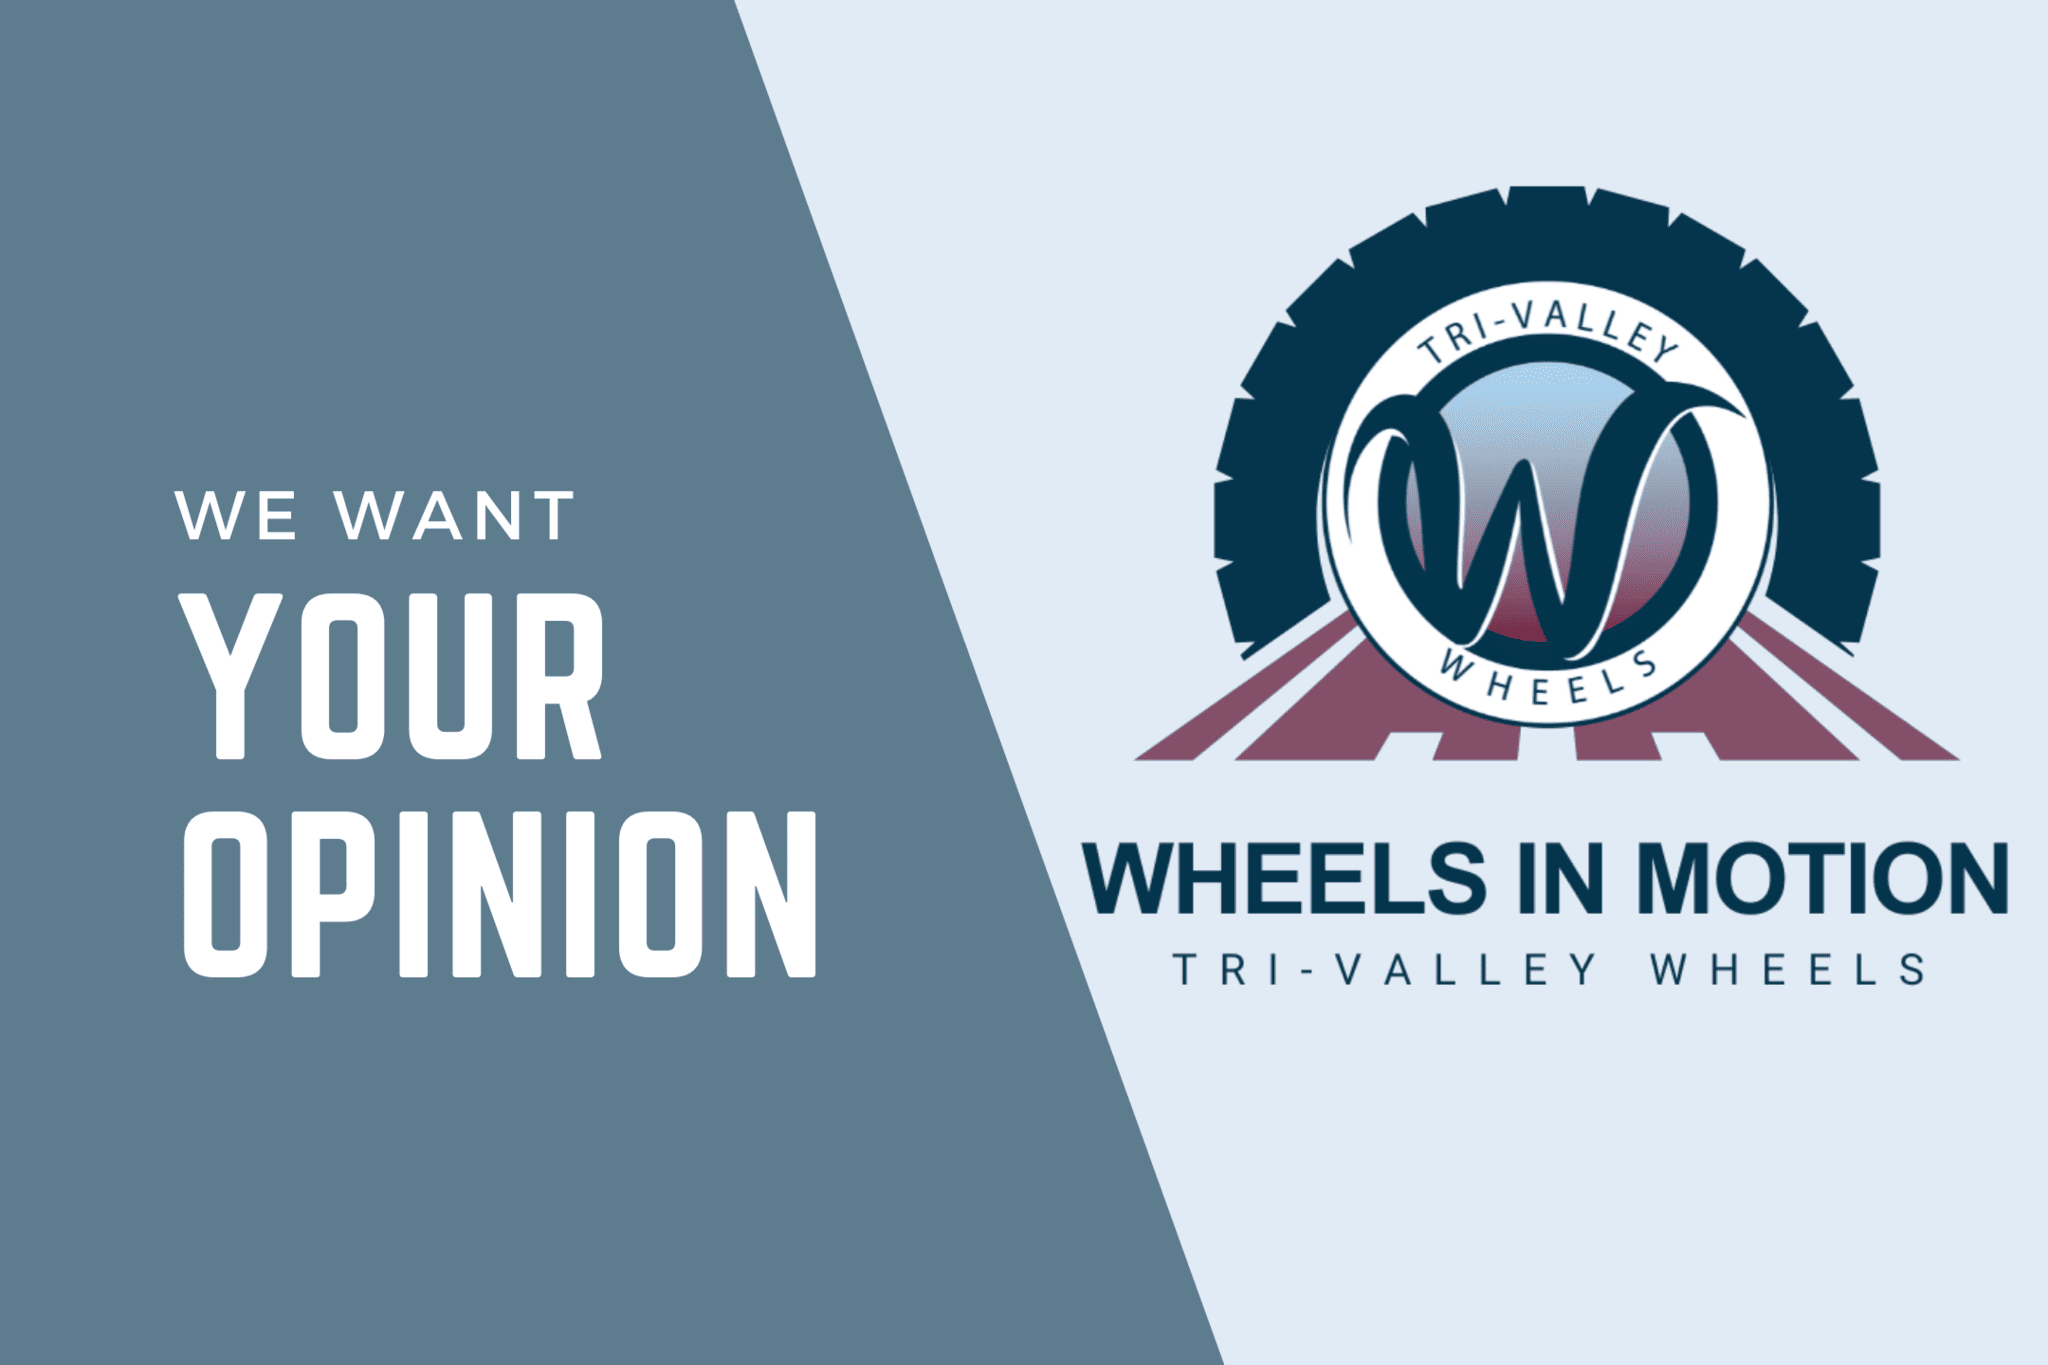 We want your opinion - Wheels in motion - Tri-Valley Wheels